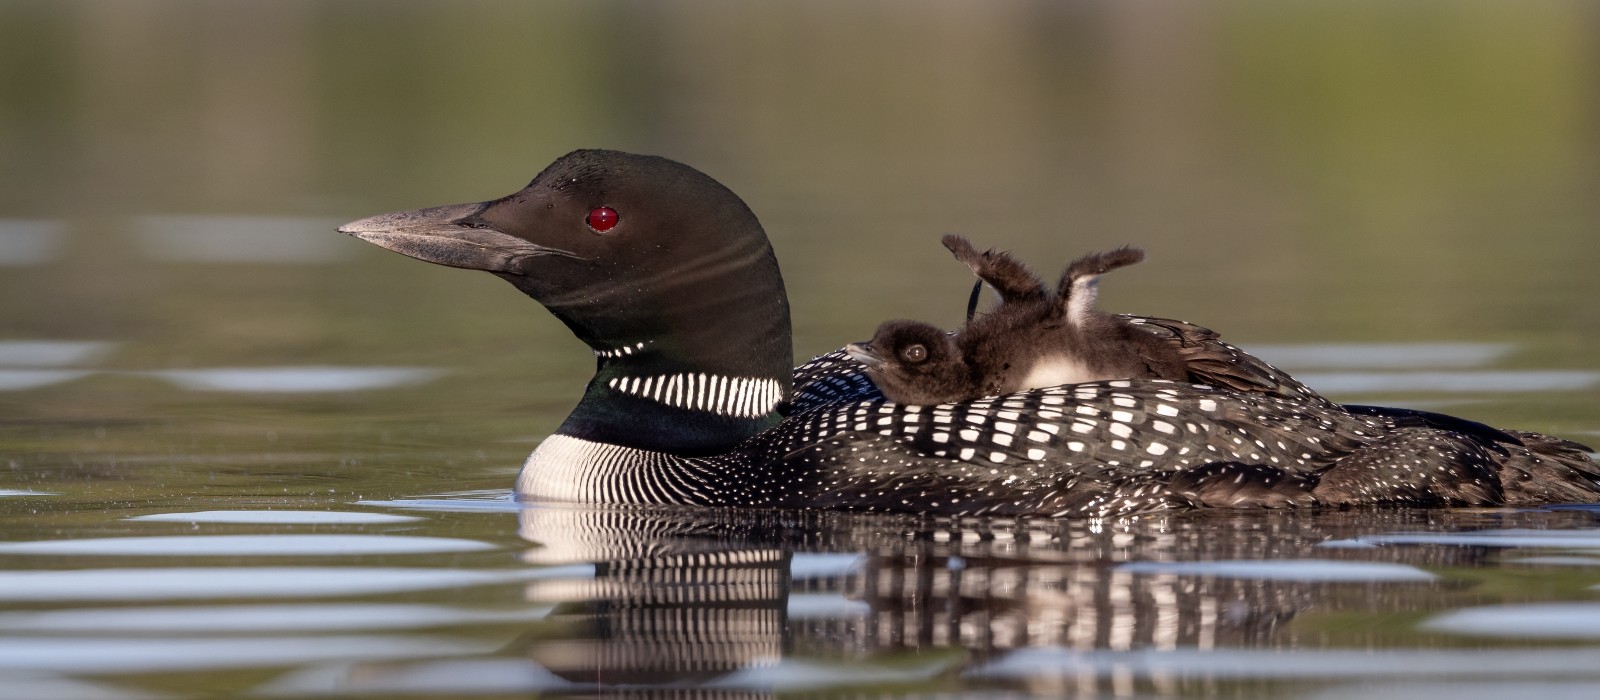 a-common-loon-and-chick-on-a-lake-NFFFHN5 (1)